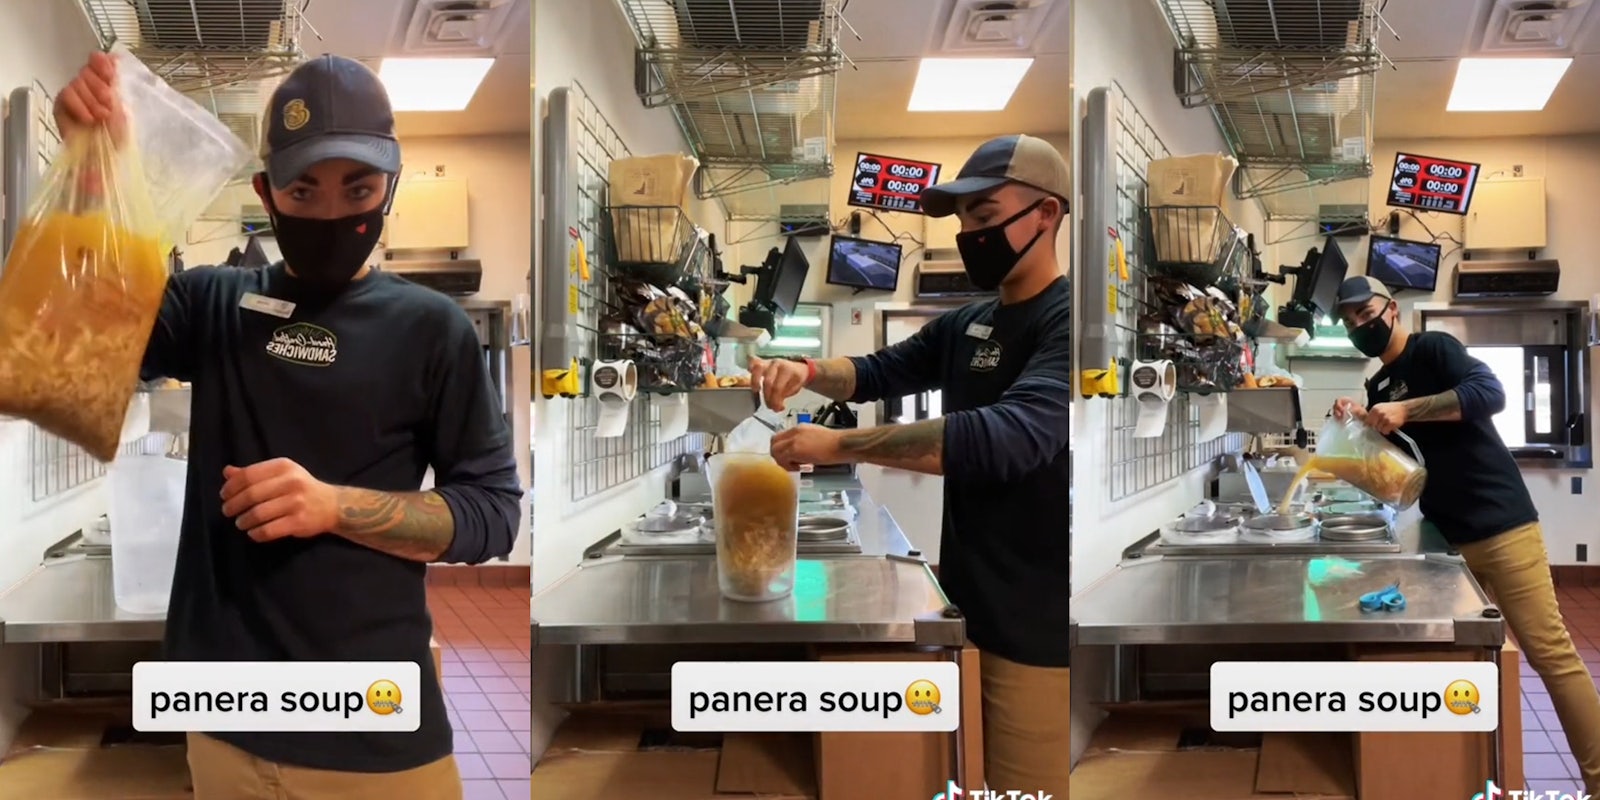 man holds up bag of soup (l) man cuts top off bag of soup (c) man pours soup into container (r) all with caption 'panera soup'